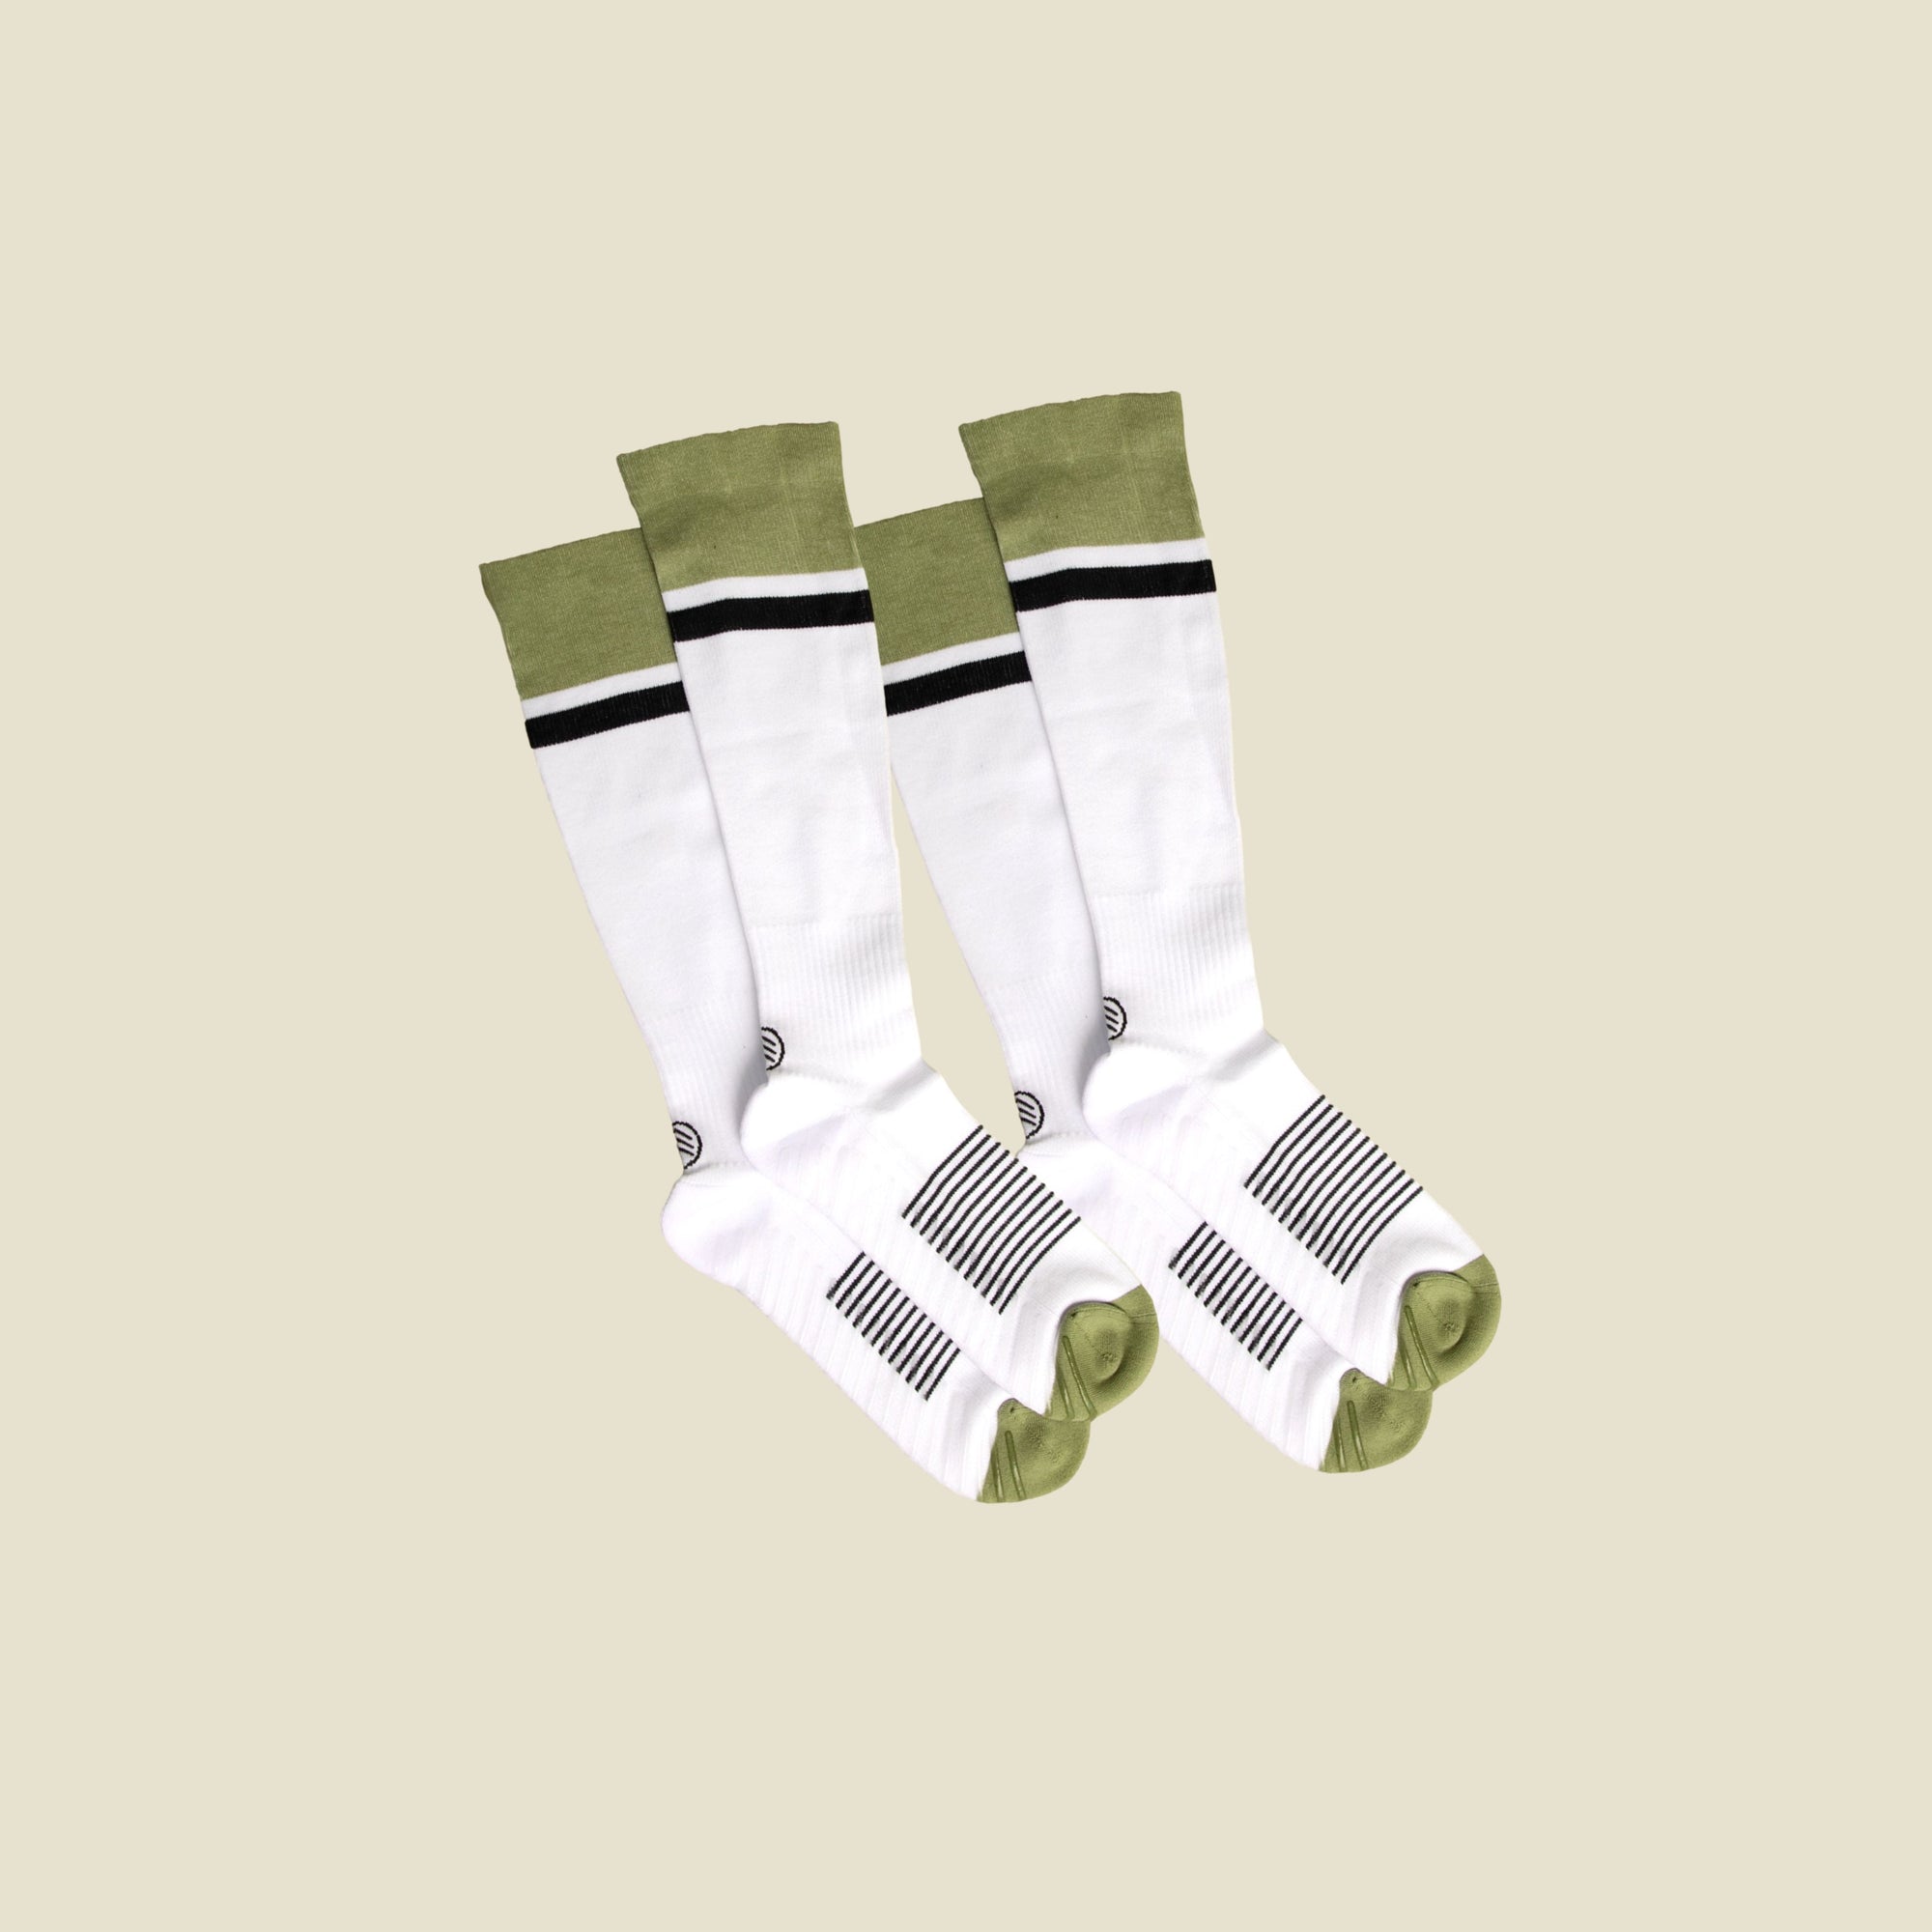 Men's White/Black/Green Compression Socks with Grips - 2 Pairs - Gripjoy Socks